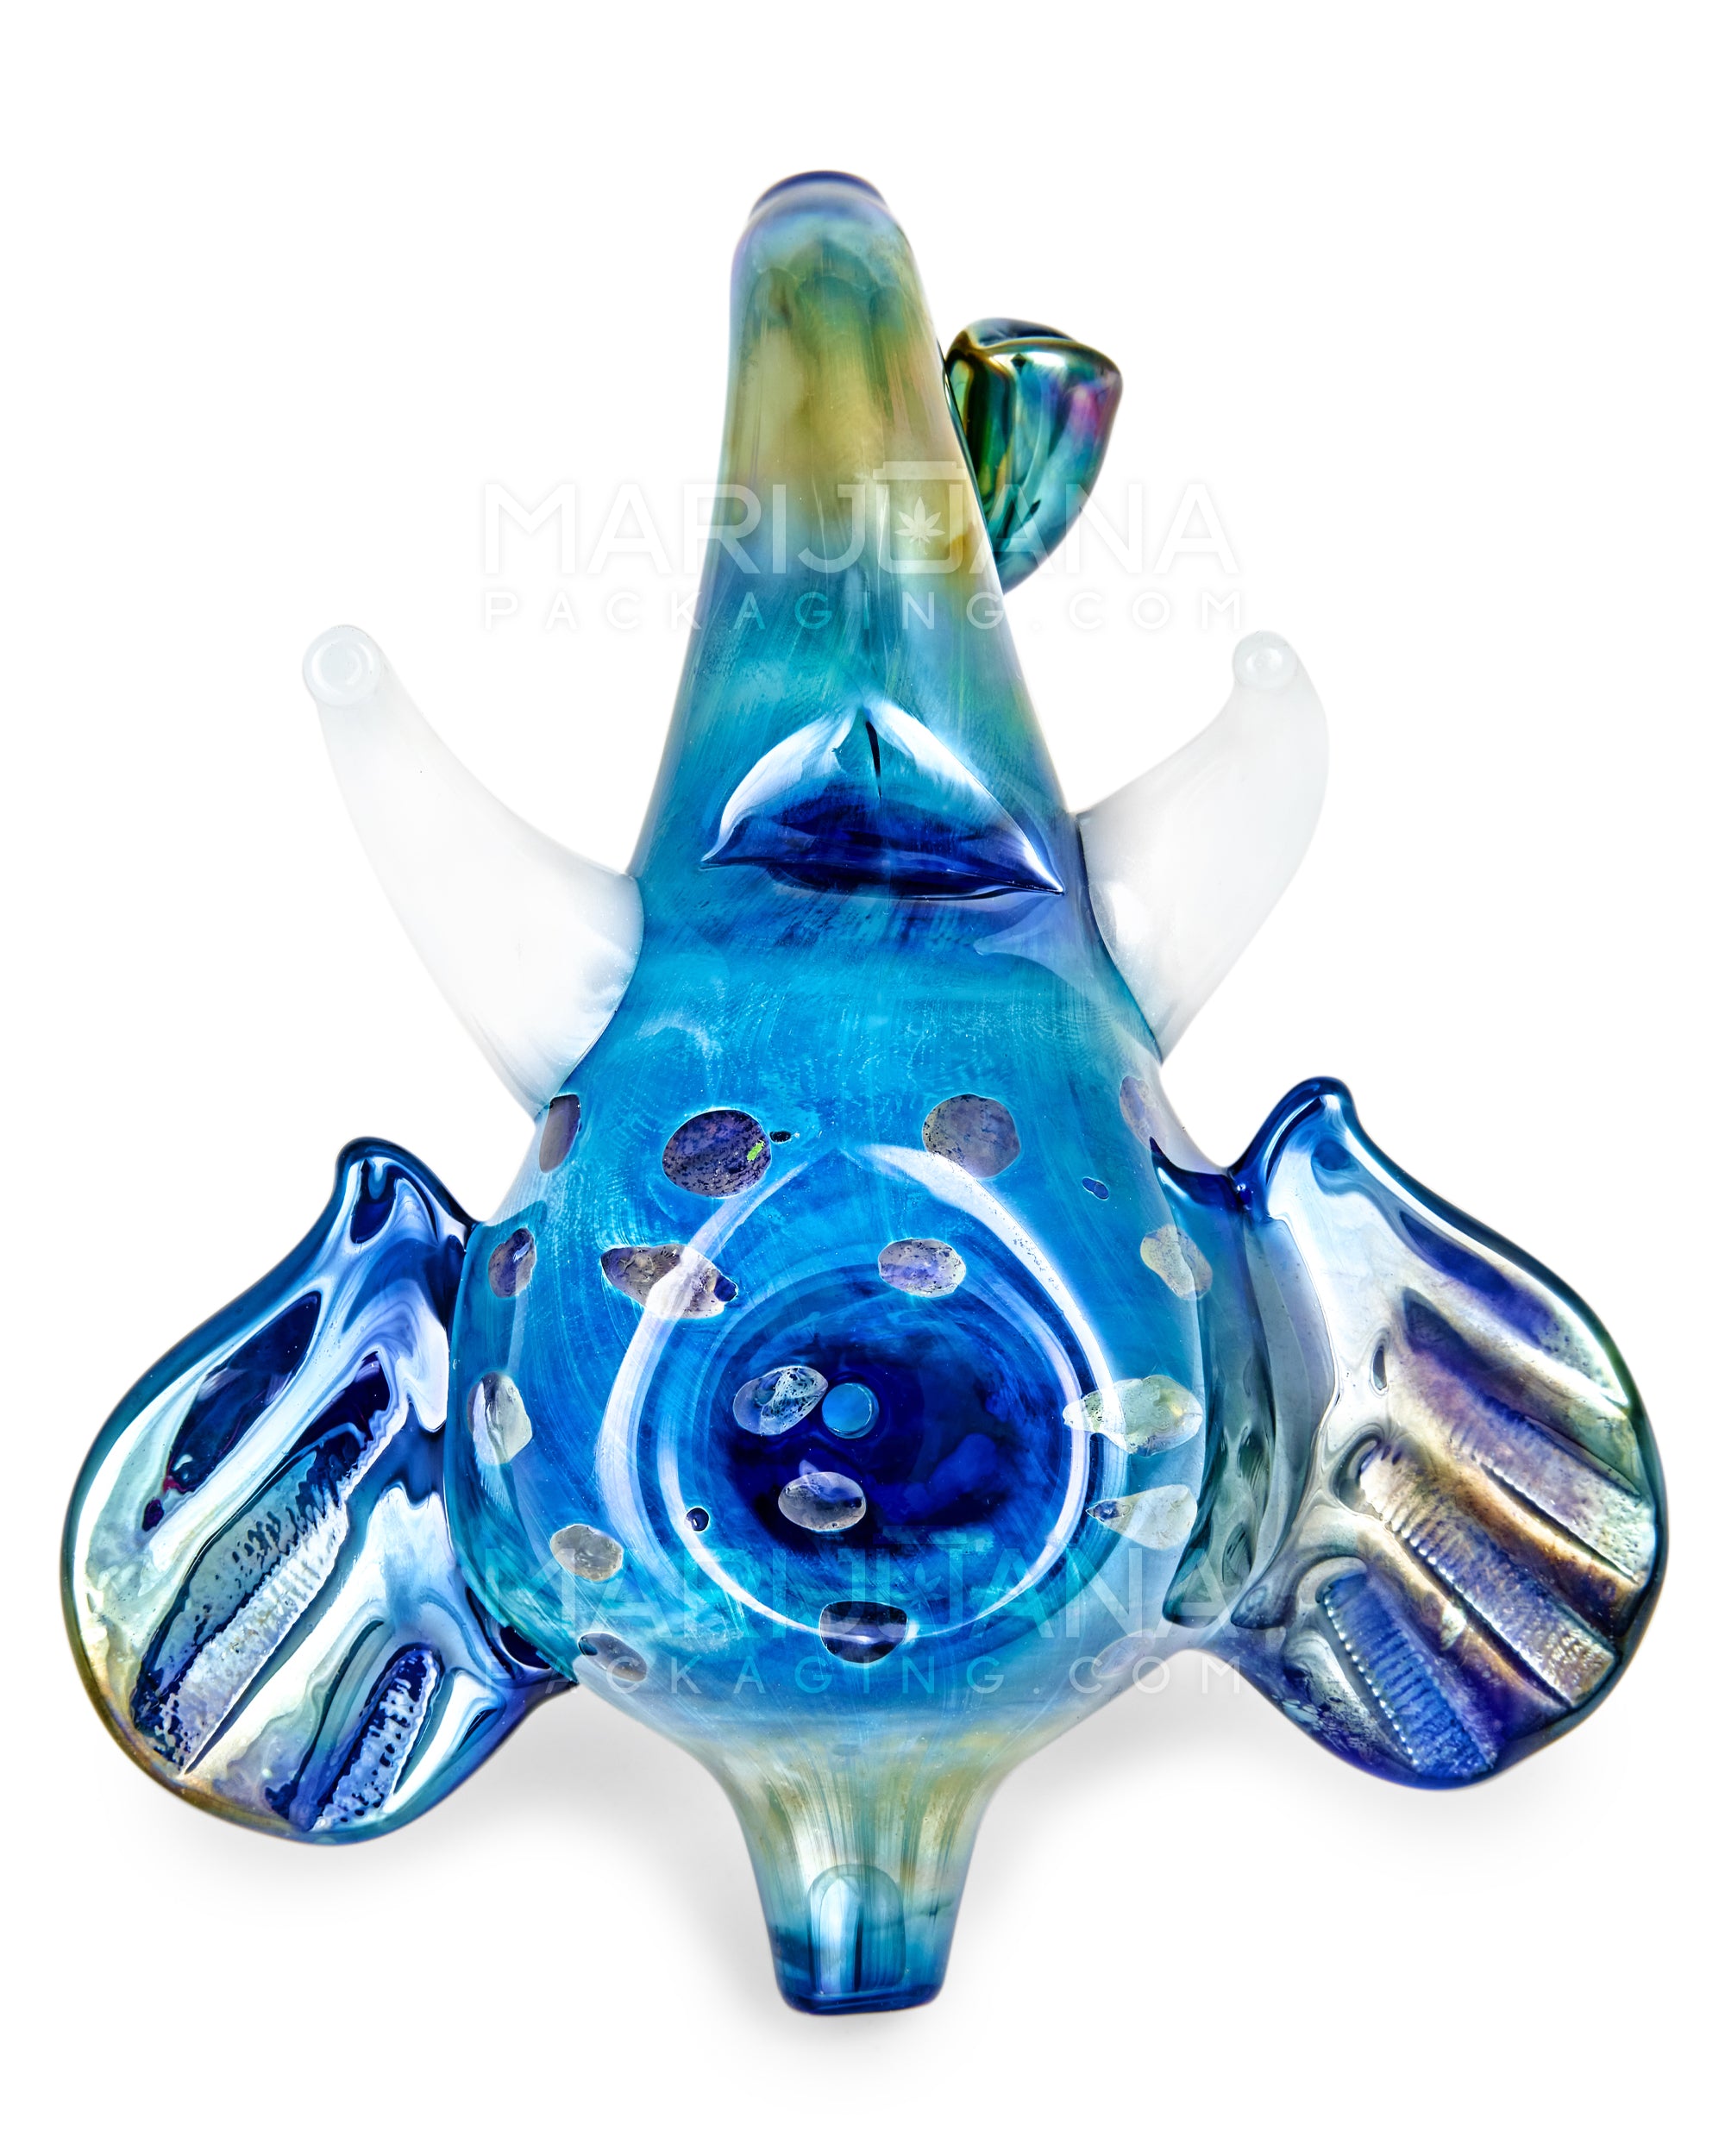 Metallic Coated Elephant Head Hand Pipe | 5in Long - Glass - Iridescent Blue - 2